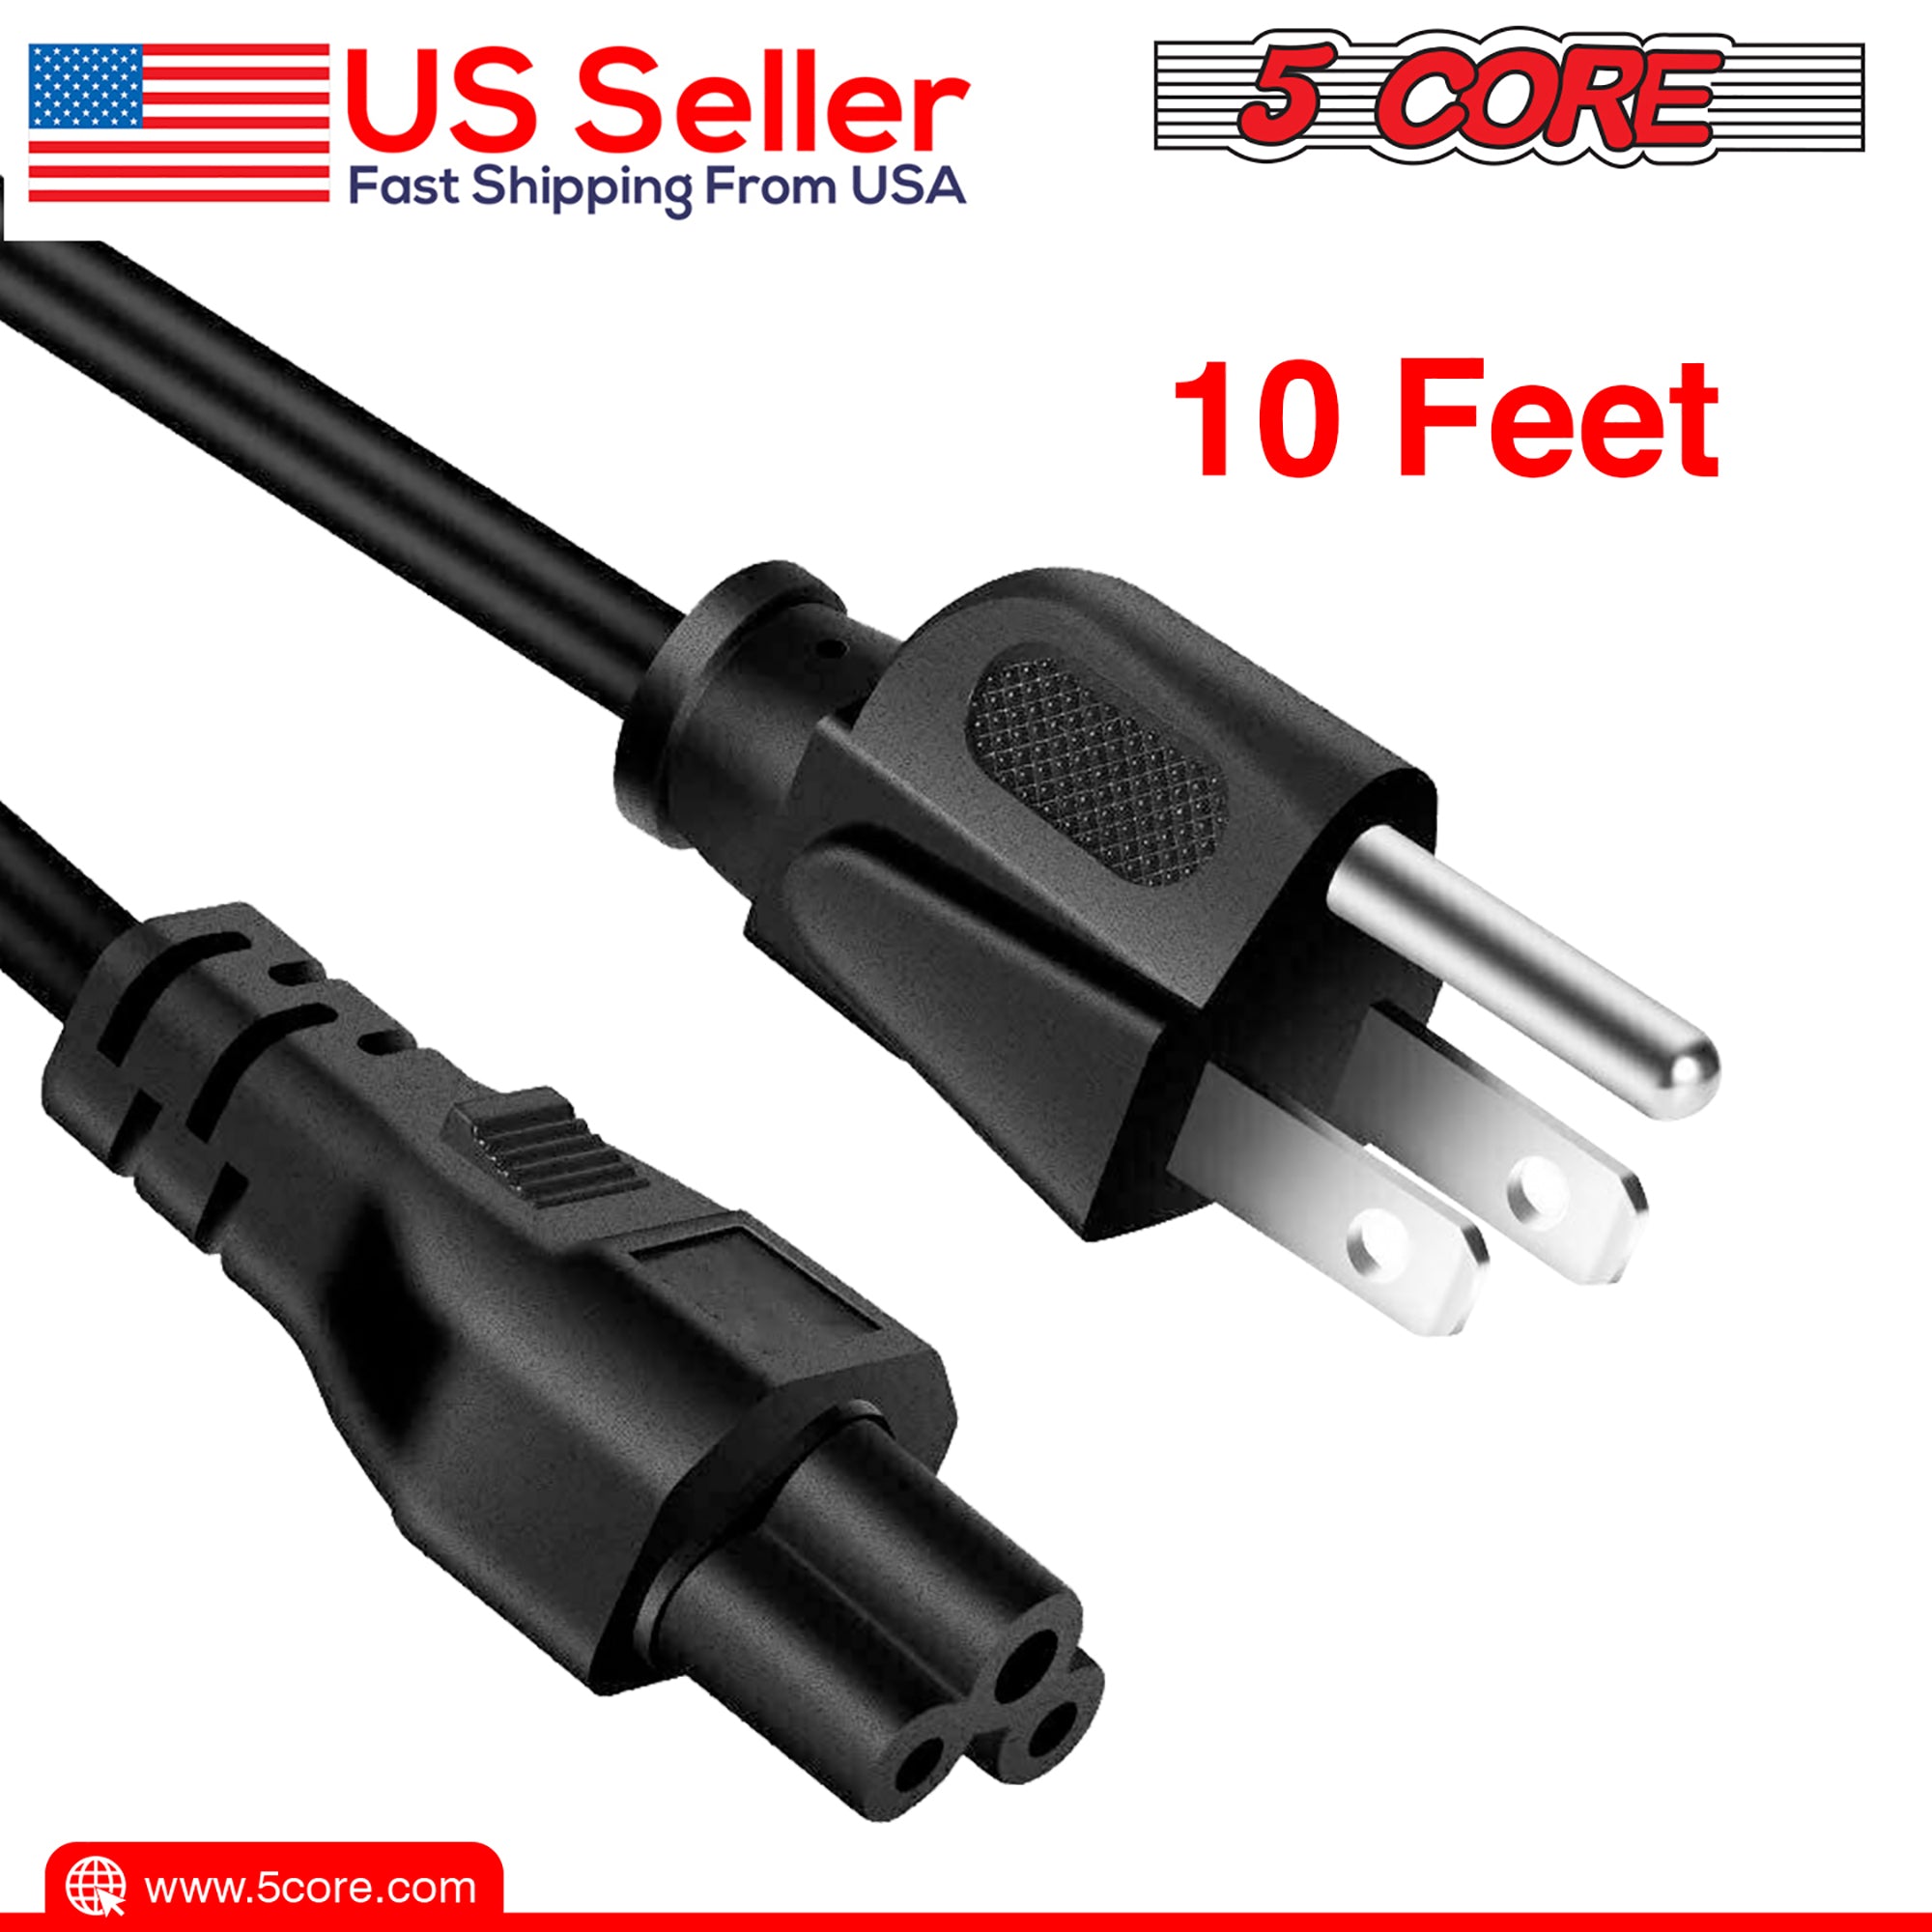 5Core AC Power Extension Cord 10Ft 3 Prong Adapter 16AWG/2C 125V 13A US Polarized Male to Female